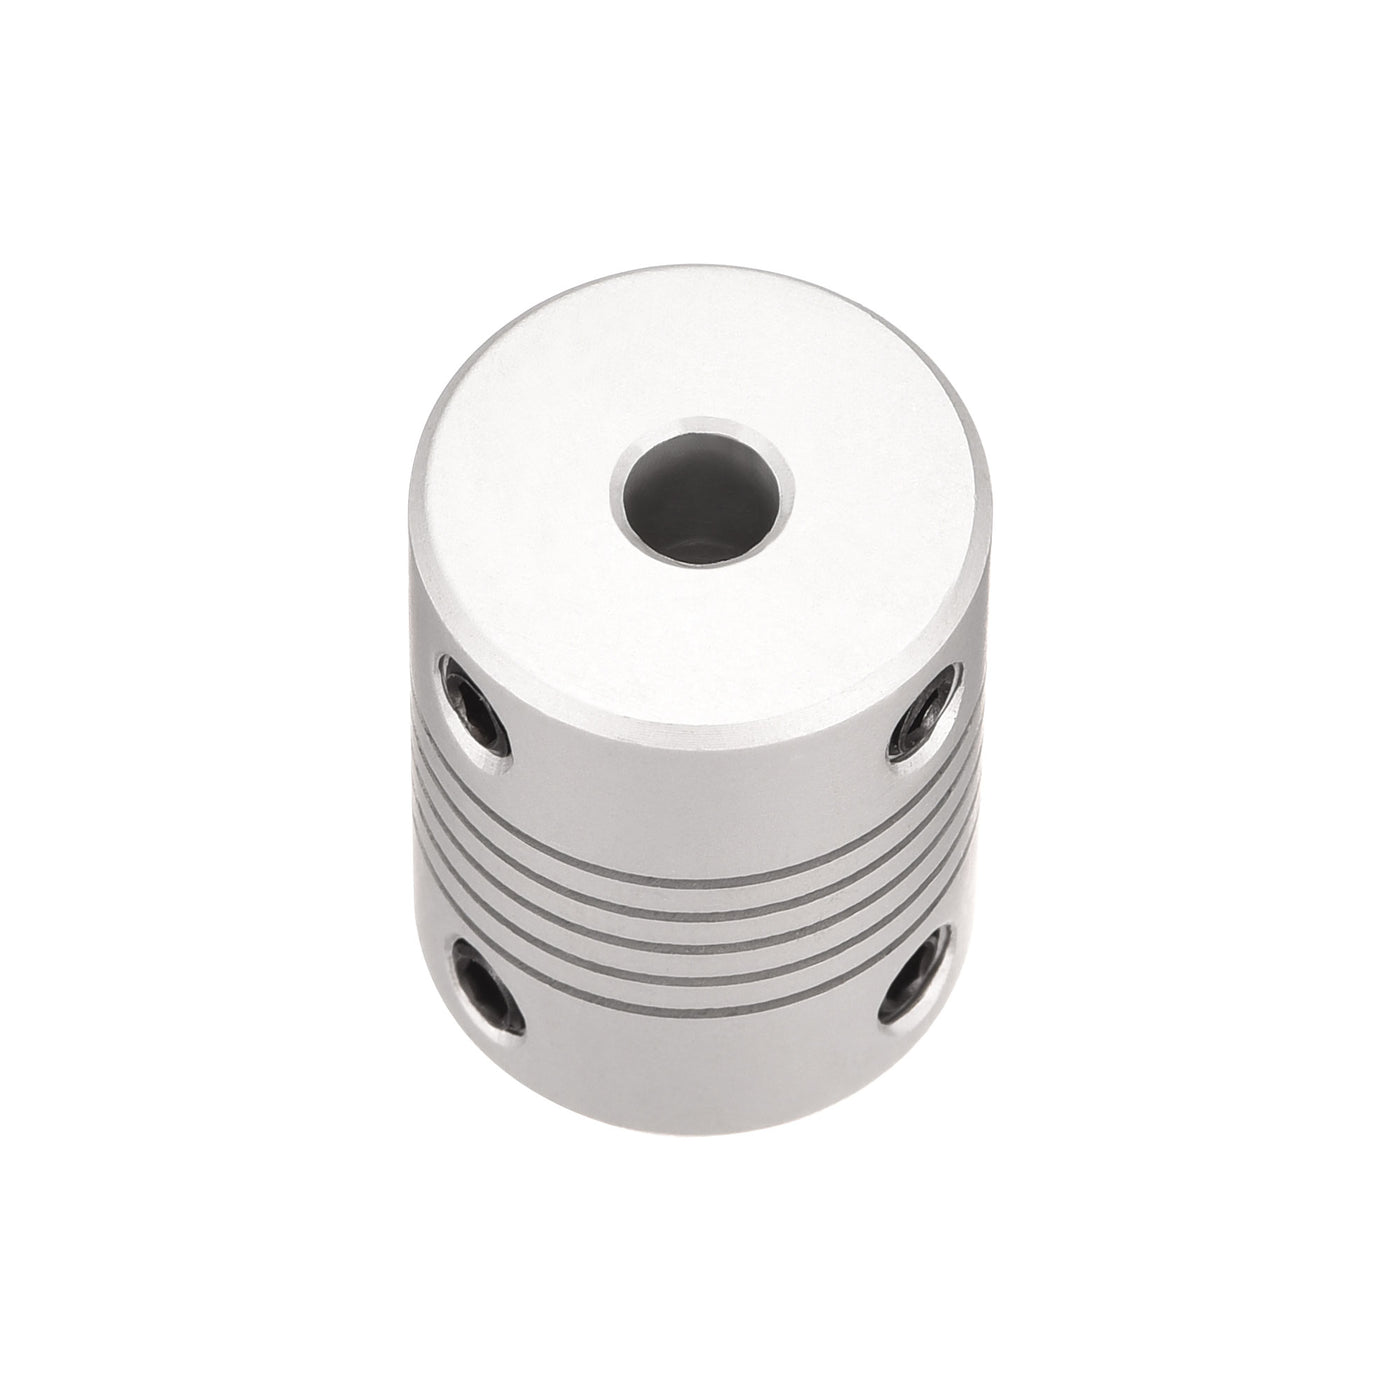 uxcell Uxcell 5mm to 9mm Aluminum Alloy Shaft Coupling Flexible Coupler L25xD19 Silver,5pcs